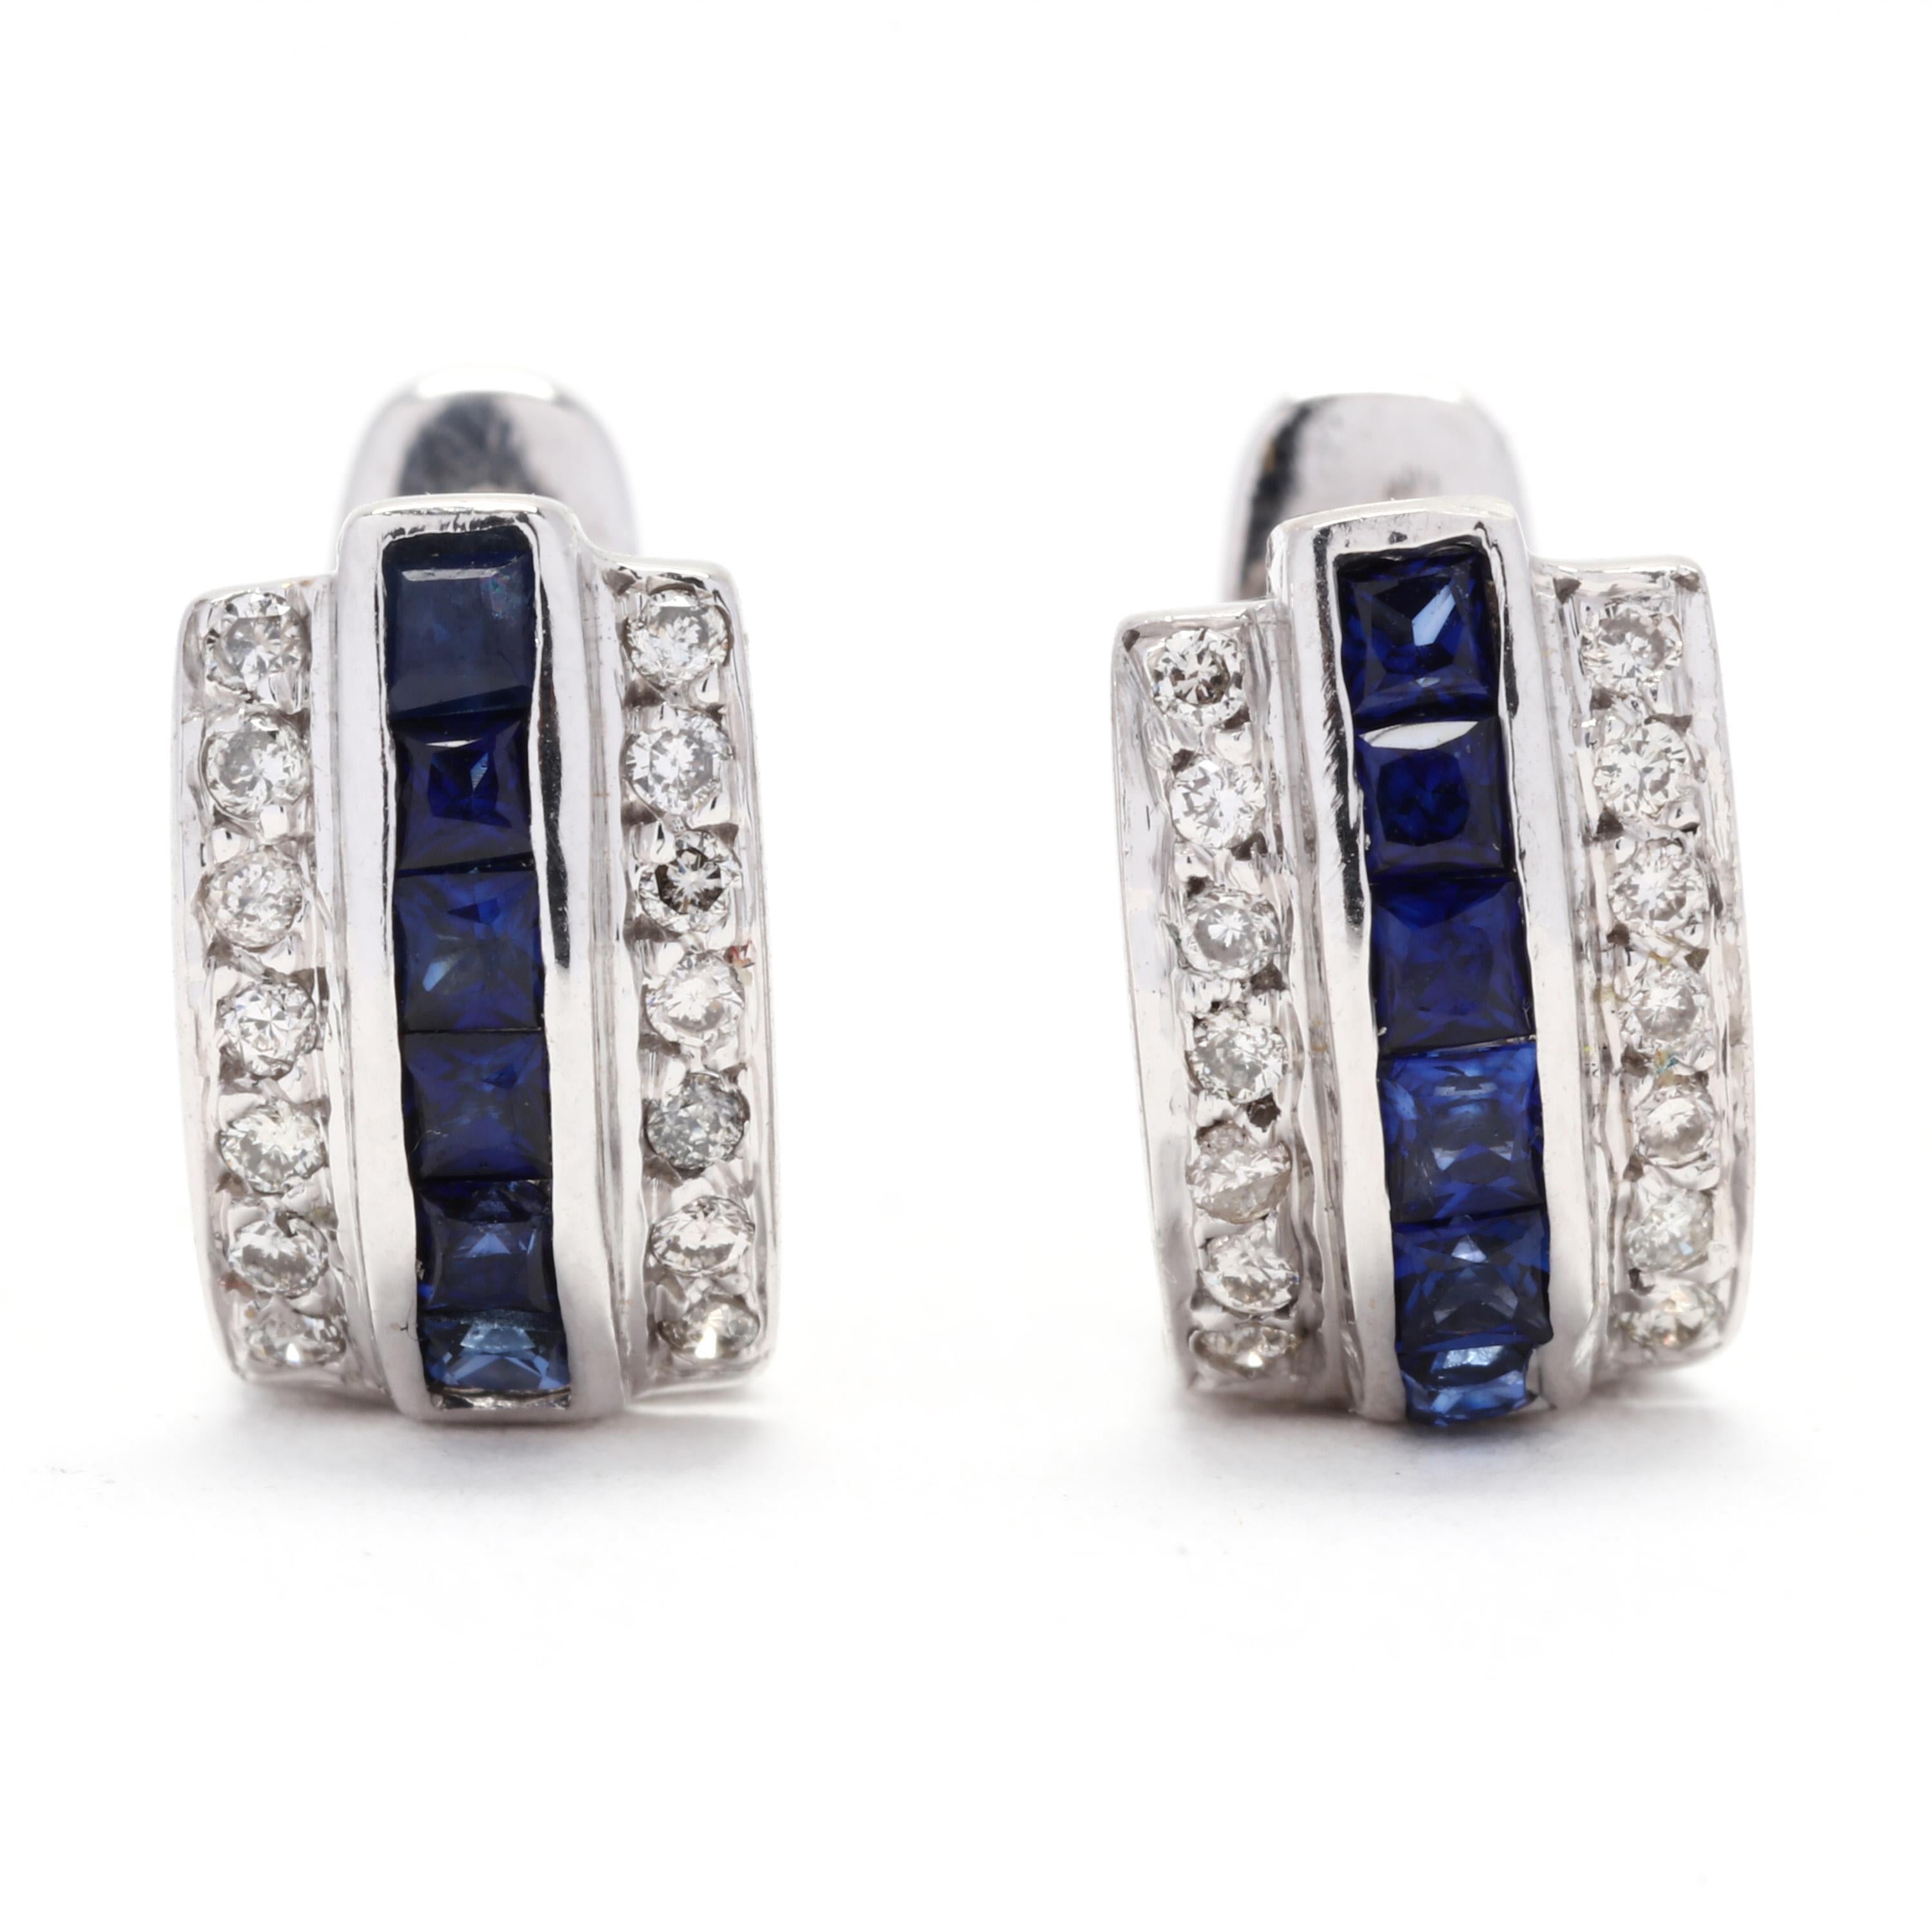 Add a pop of color and sparkle to your jewelry collection with these 0.61ctw sapphire diamond mini huggie hoop earrings. Made with 18K white gold, these earrings feature a stunning combination of sapphires and diamonds. The sapphires have a total